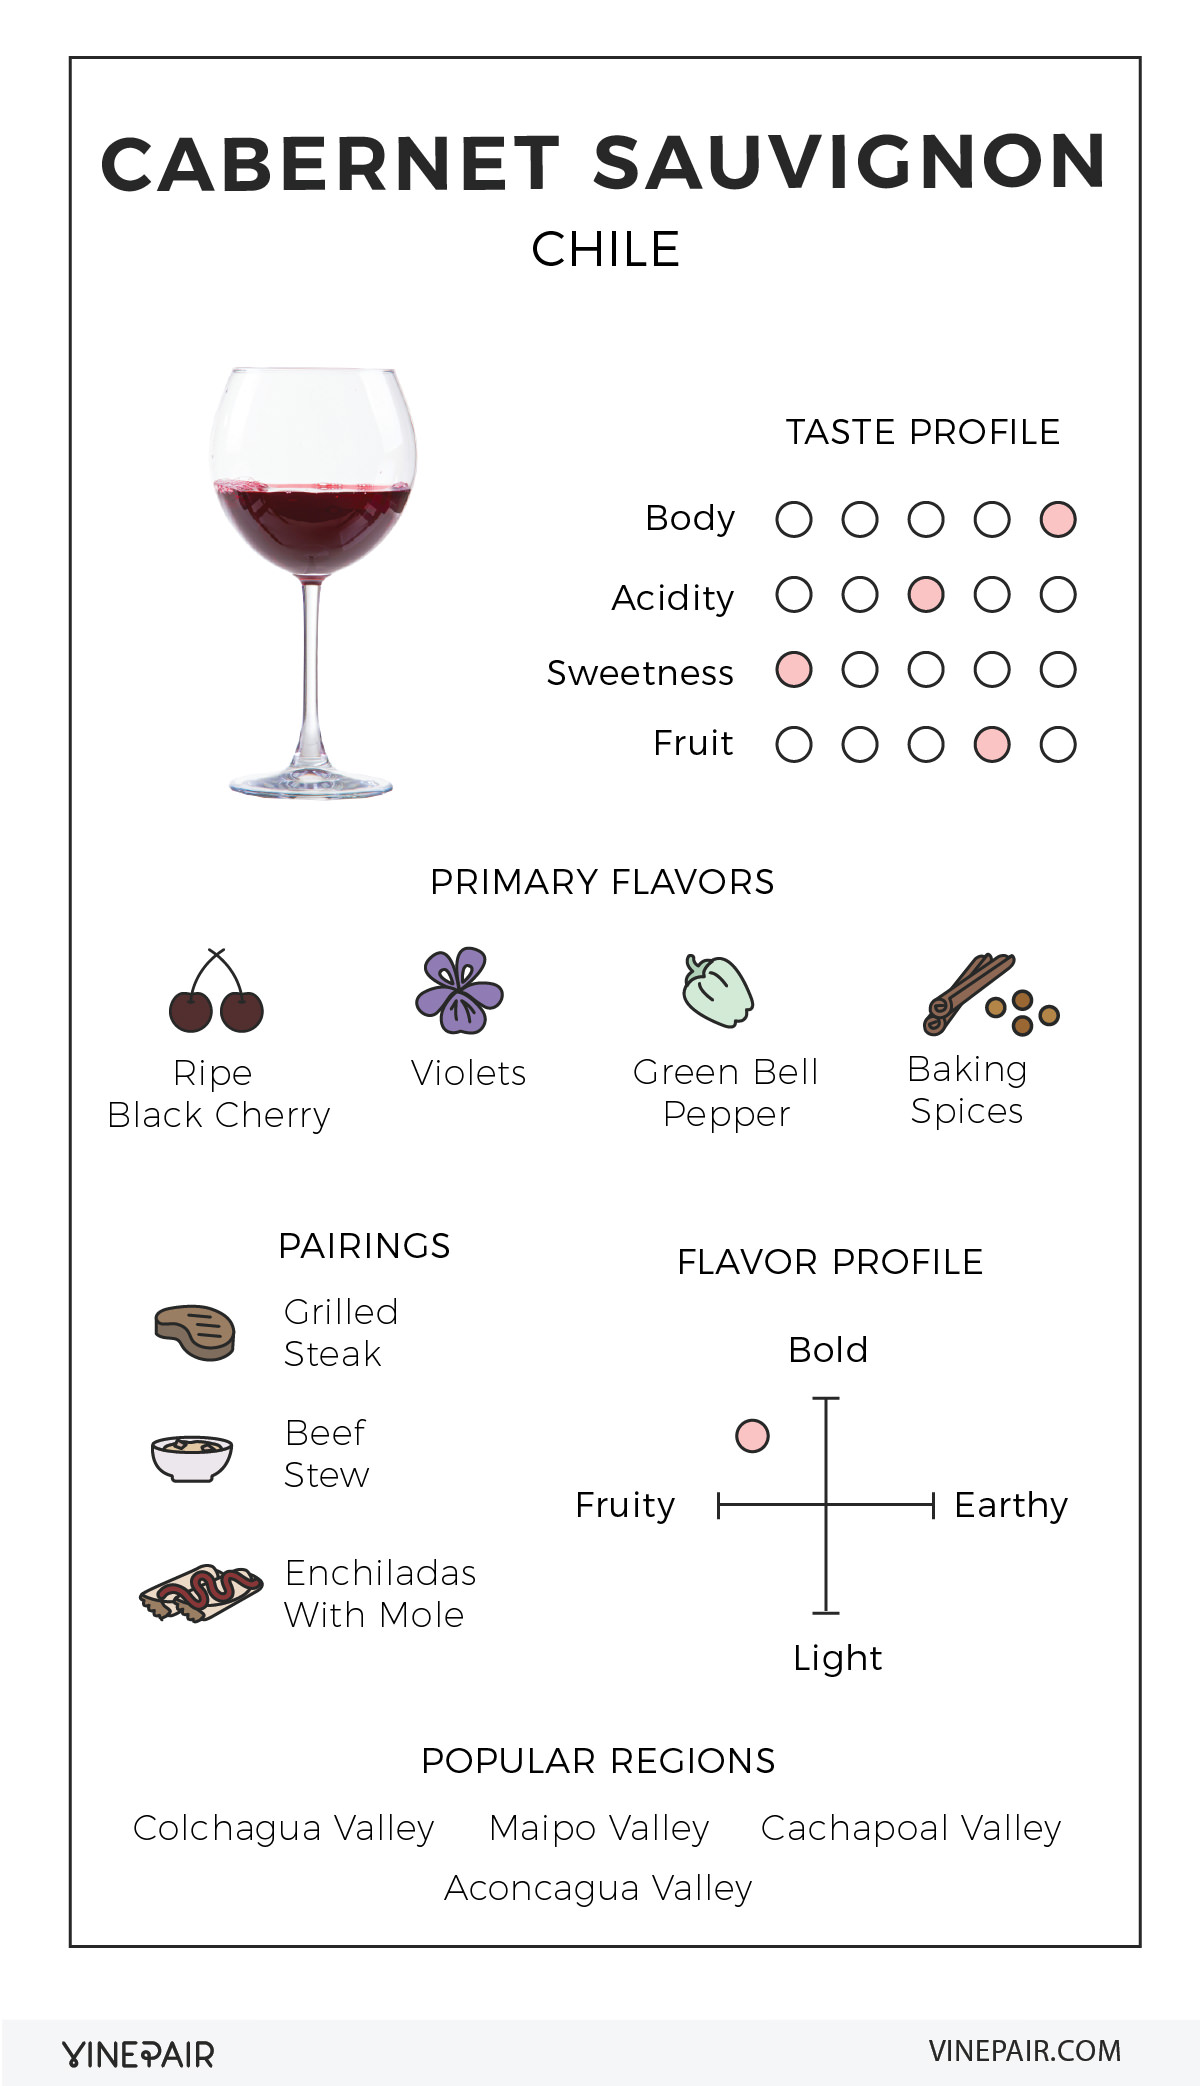 An Illustrated Guide to Cabernet Sauvignon from Chile